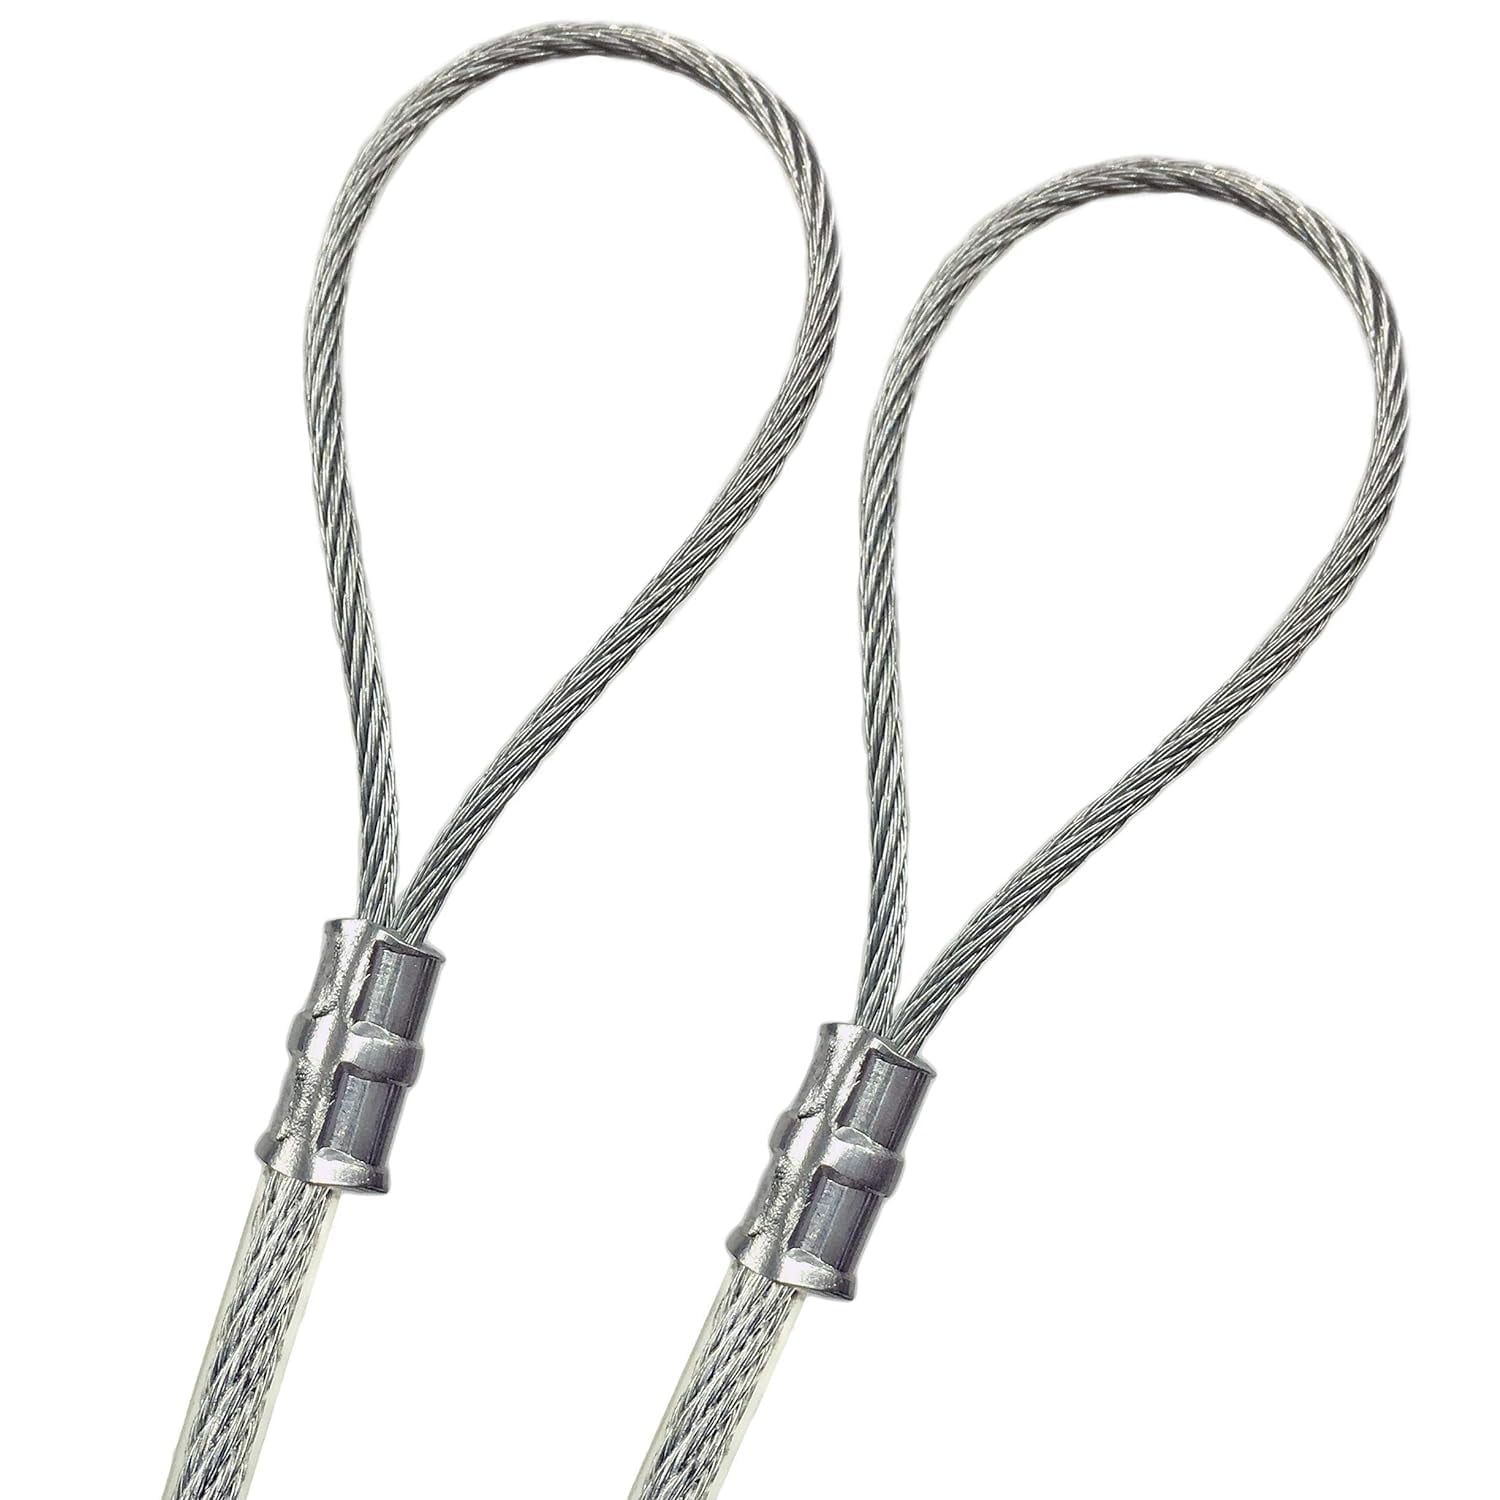 Galvanized Steel 1/8” Vinyl Coated Wire Rope 7X7 Strand 1/16” , Double  Loops Aluminum Sleeves One Hook/Eye Turnbuckles, MADE TO ORDER Clothesline  Safety Braided Cable (130 Feet, Clear) 